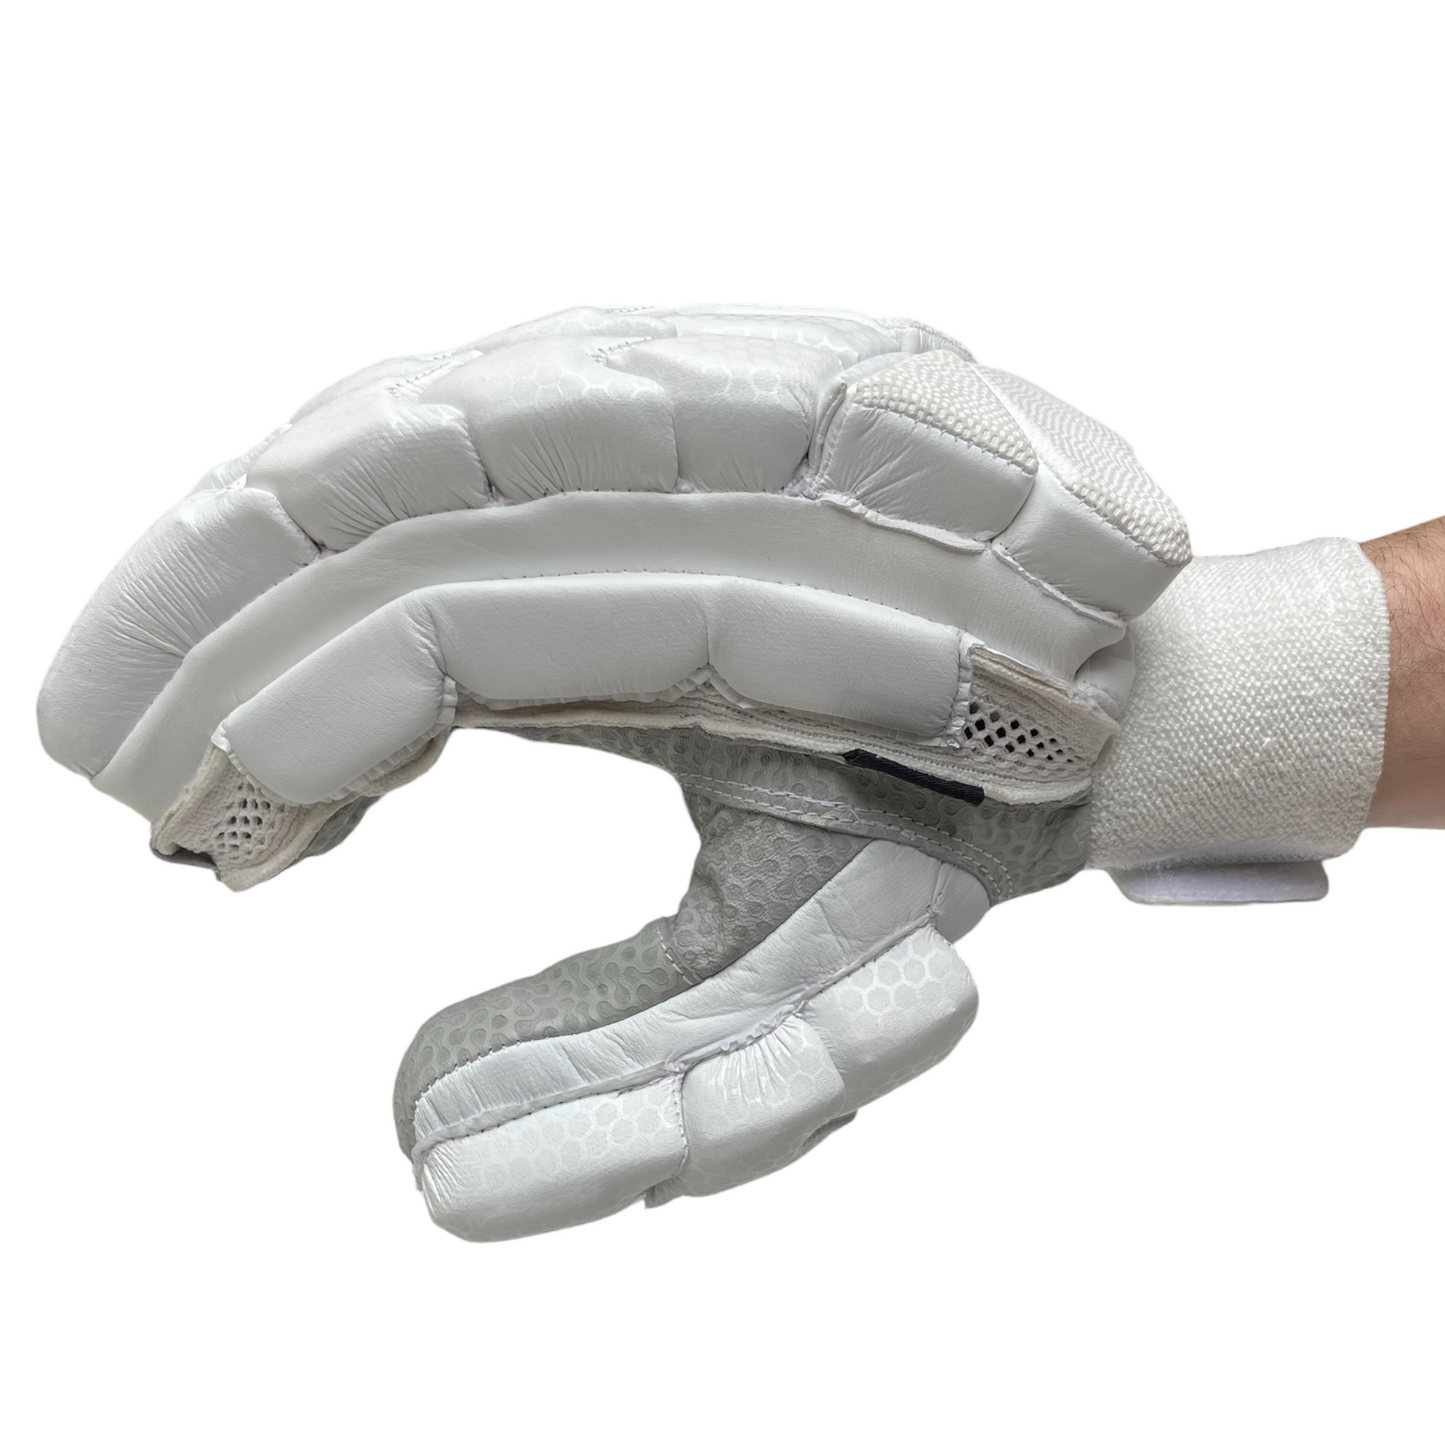 Premium cricket batting glove. Lightweight professional protection.  Comfortable, Pittard leather, Carbon Design. Minimalist look. Towelling wrist strap. RH & LH. Custom Cricket 201. Cricket shop store Brighton & Hove East Sussex.  Appointment only.  Next day delivery. Same day collection.